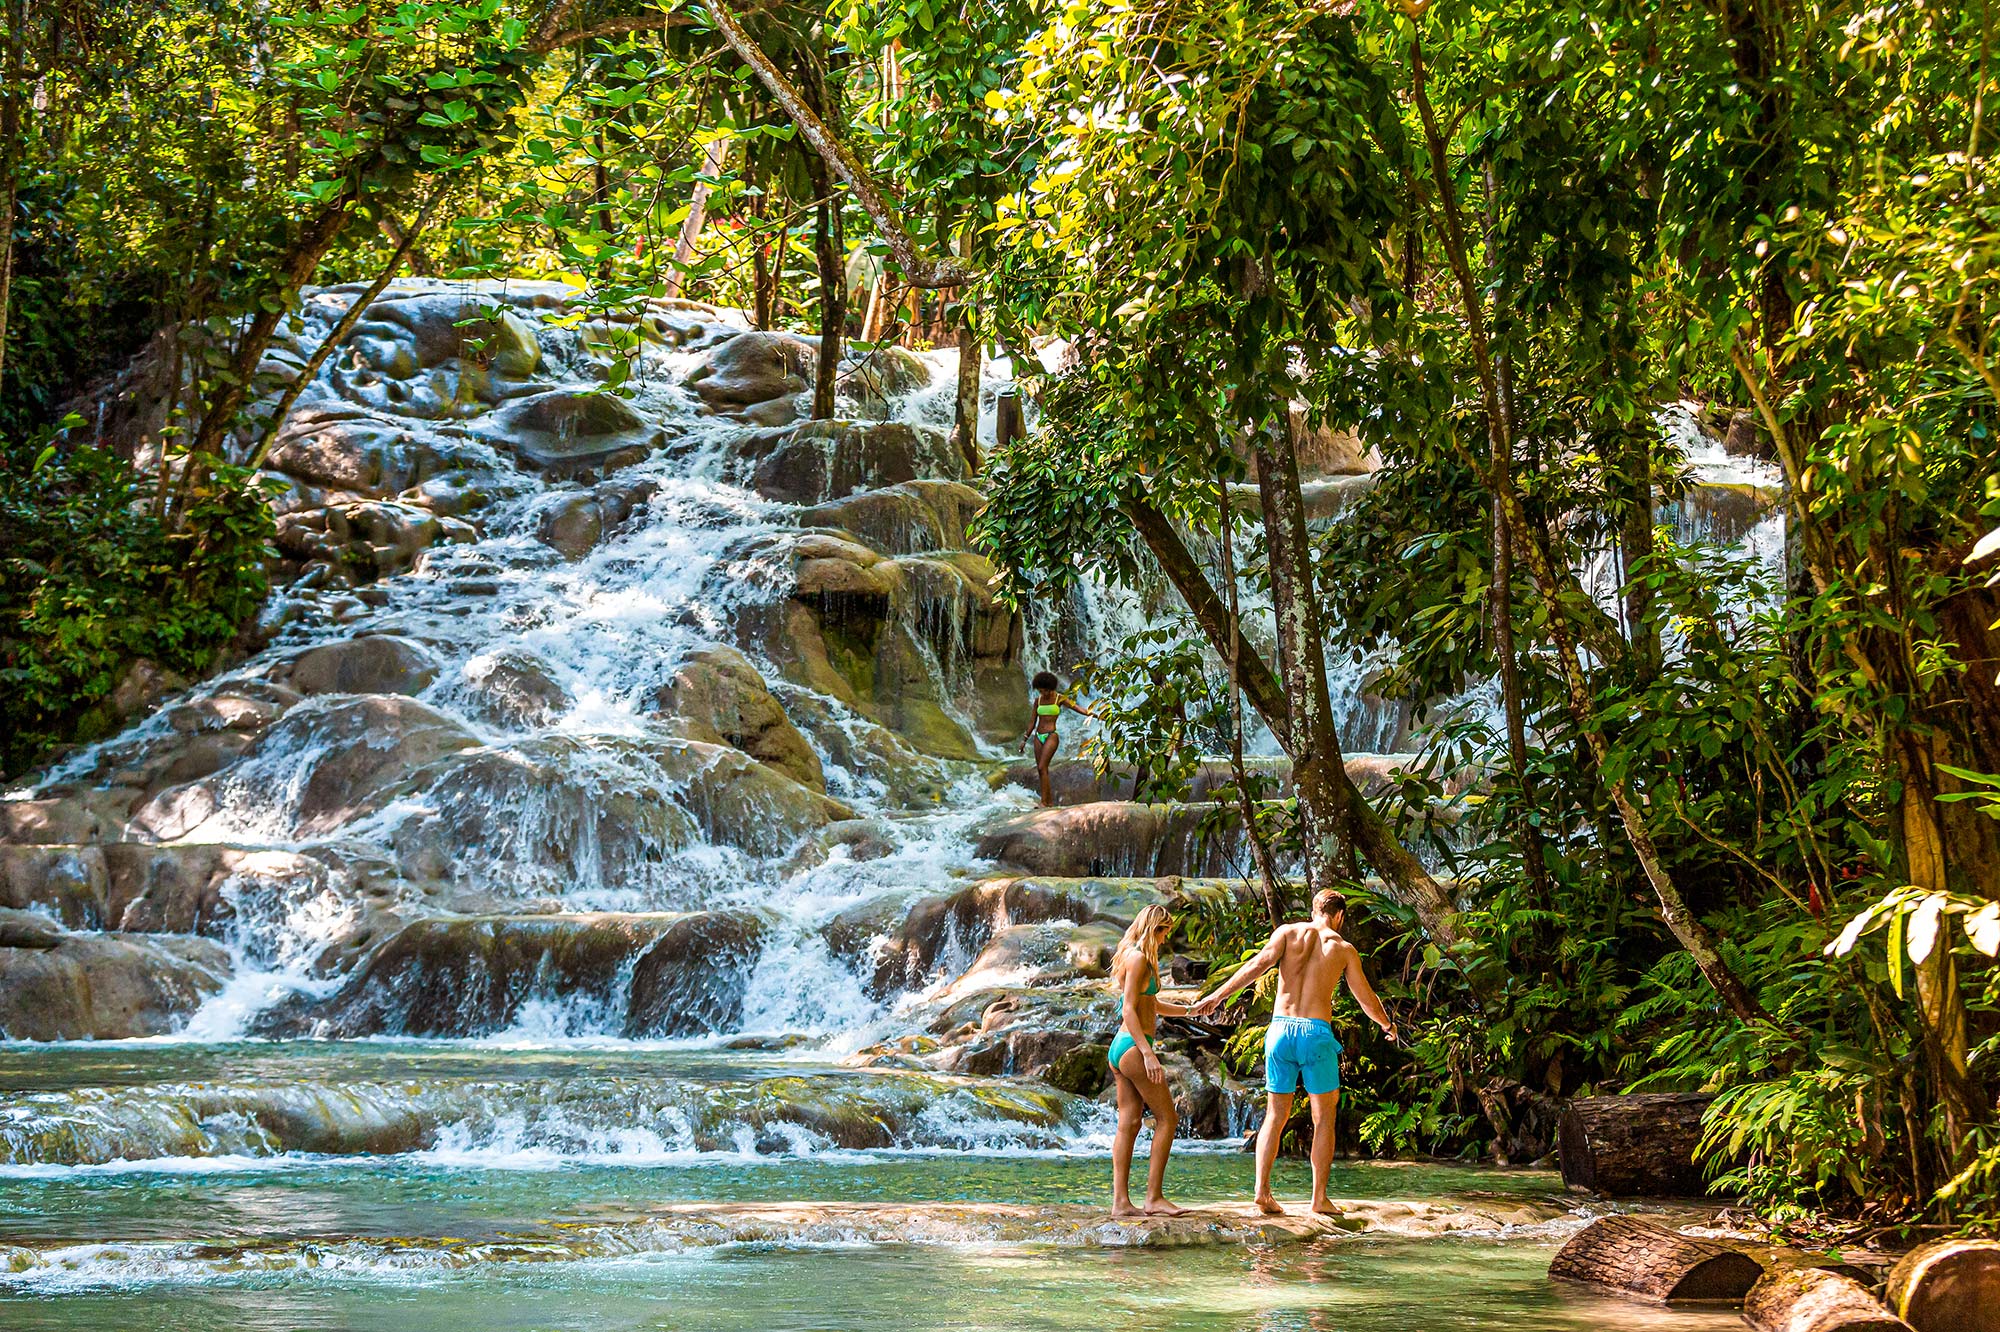 Dunns River Falls Overview